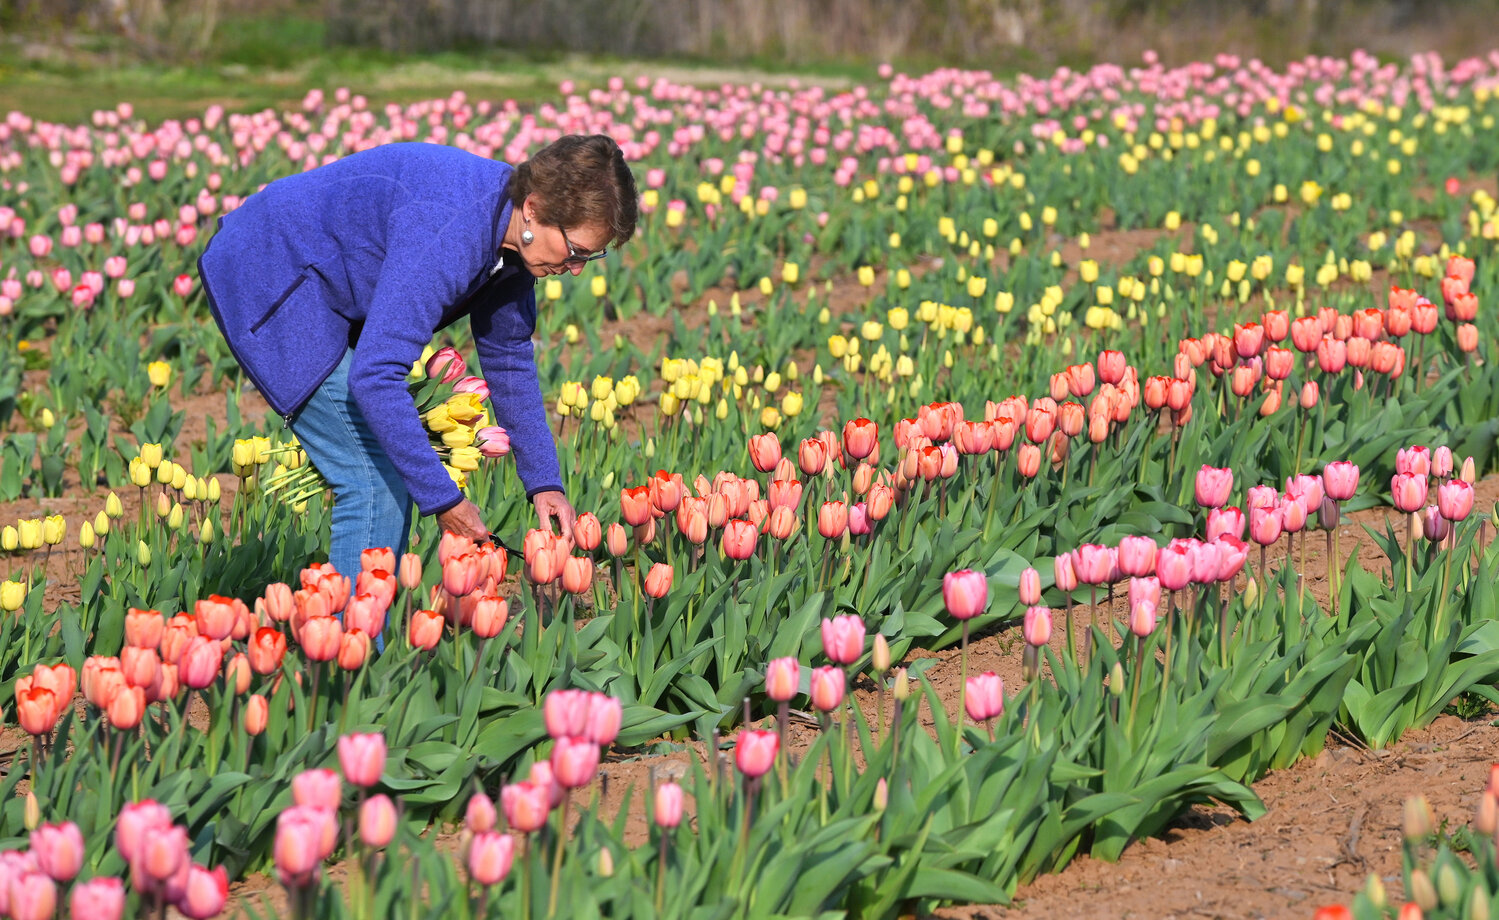 Elaine Joseph gets the first pick of the tulips in this 2019 file photo. North Star will offer the opportunity for pickers to visit the orchard around Mother’s Day — which is Sunday, May 14 this year — to pick their own tulip bouquet.